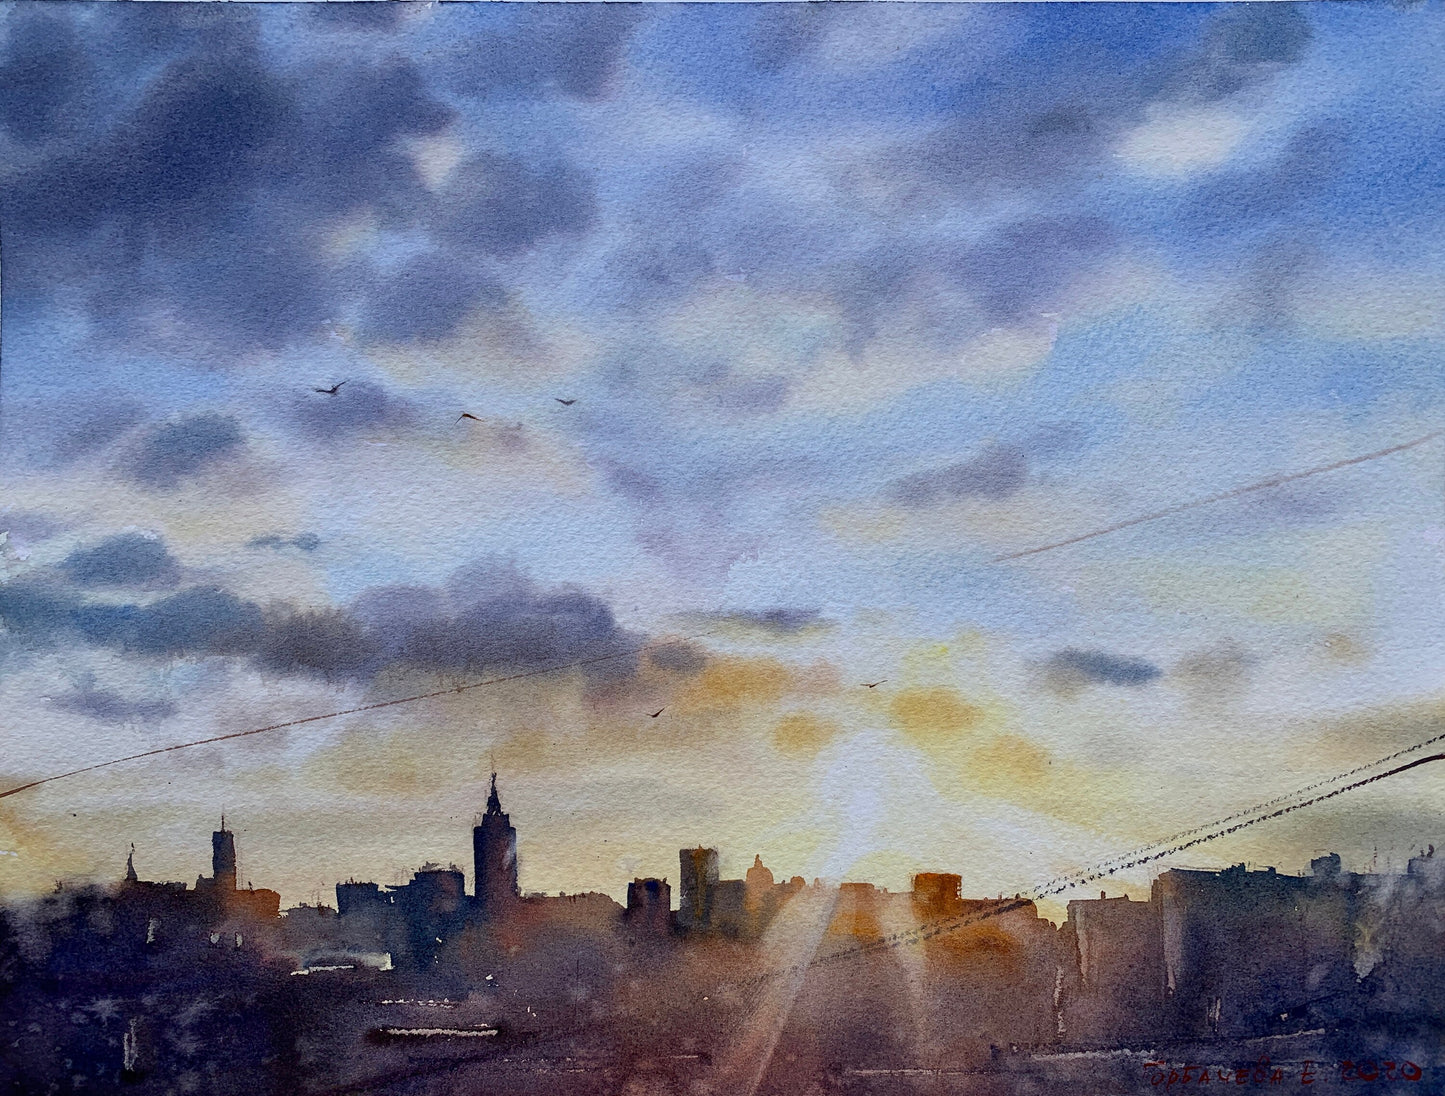 City Sunrise Painting Original Watercolor, Architecture Art, Cityscape Wall Art, Gift, Clouds, Sky, Buildings